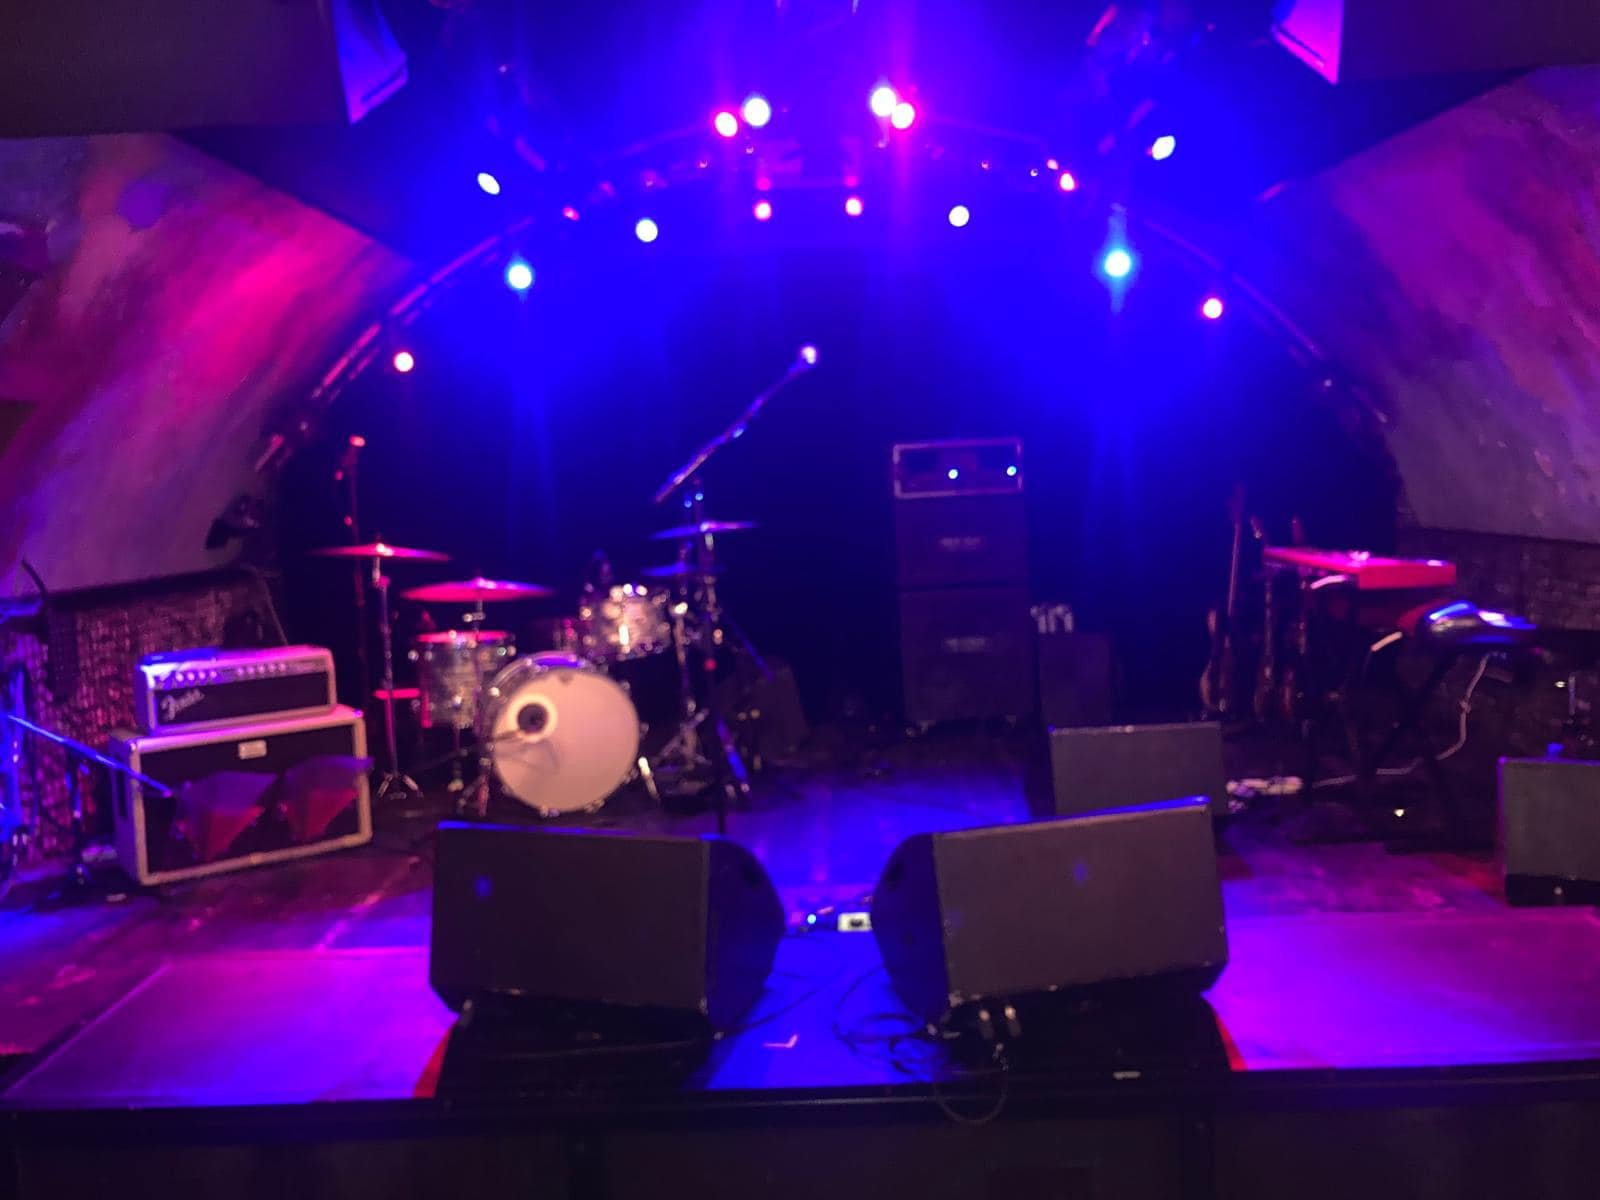 After a fantastic near tonsold out show ( more than 250 people ) in Baden-Baden on Saturday, we are now set up and ready to hit the stage at Rockhouse Salzburg. 
Cone and say hello.